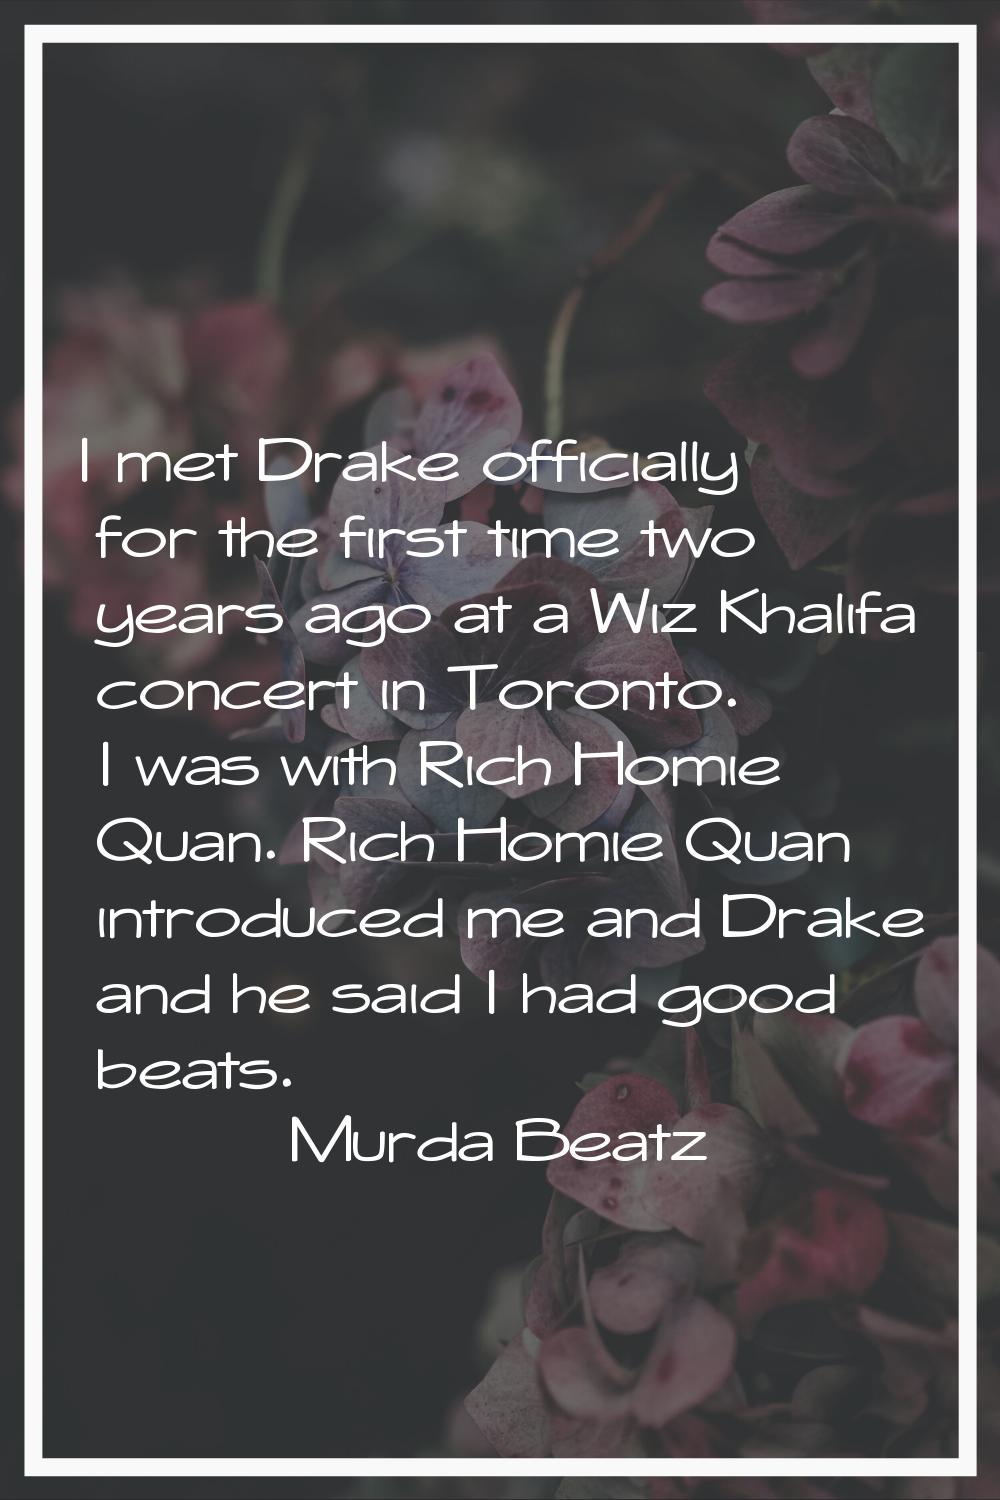 I met Drake officially for the first time two years ago at a Wiz Khalifa concert in Toronto. I was 